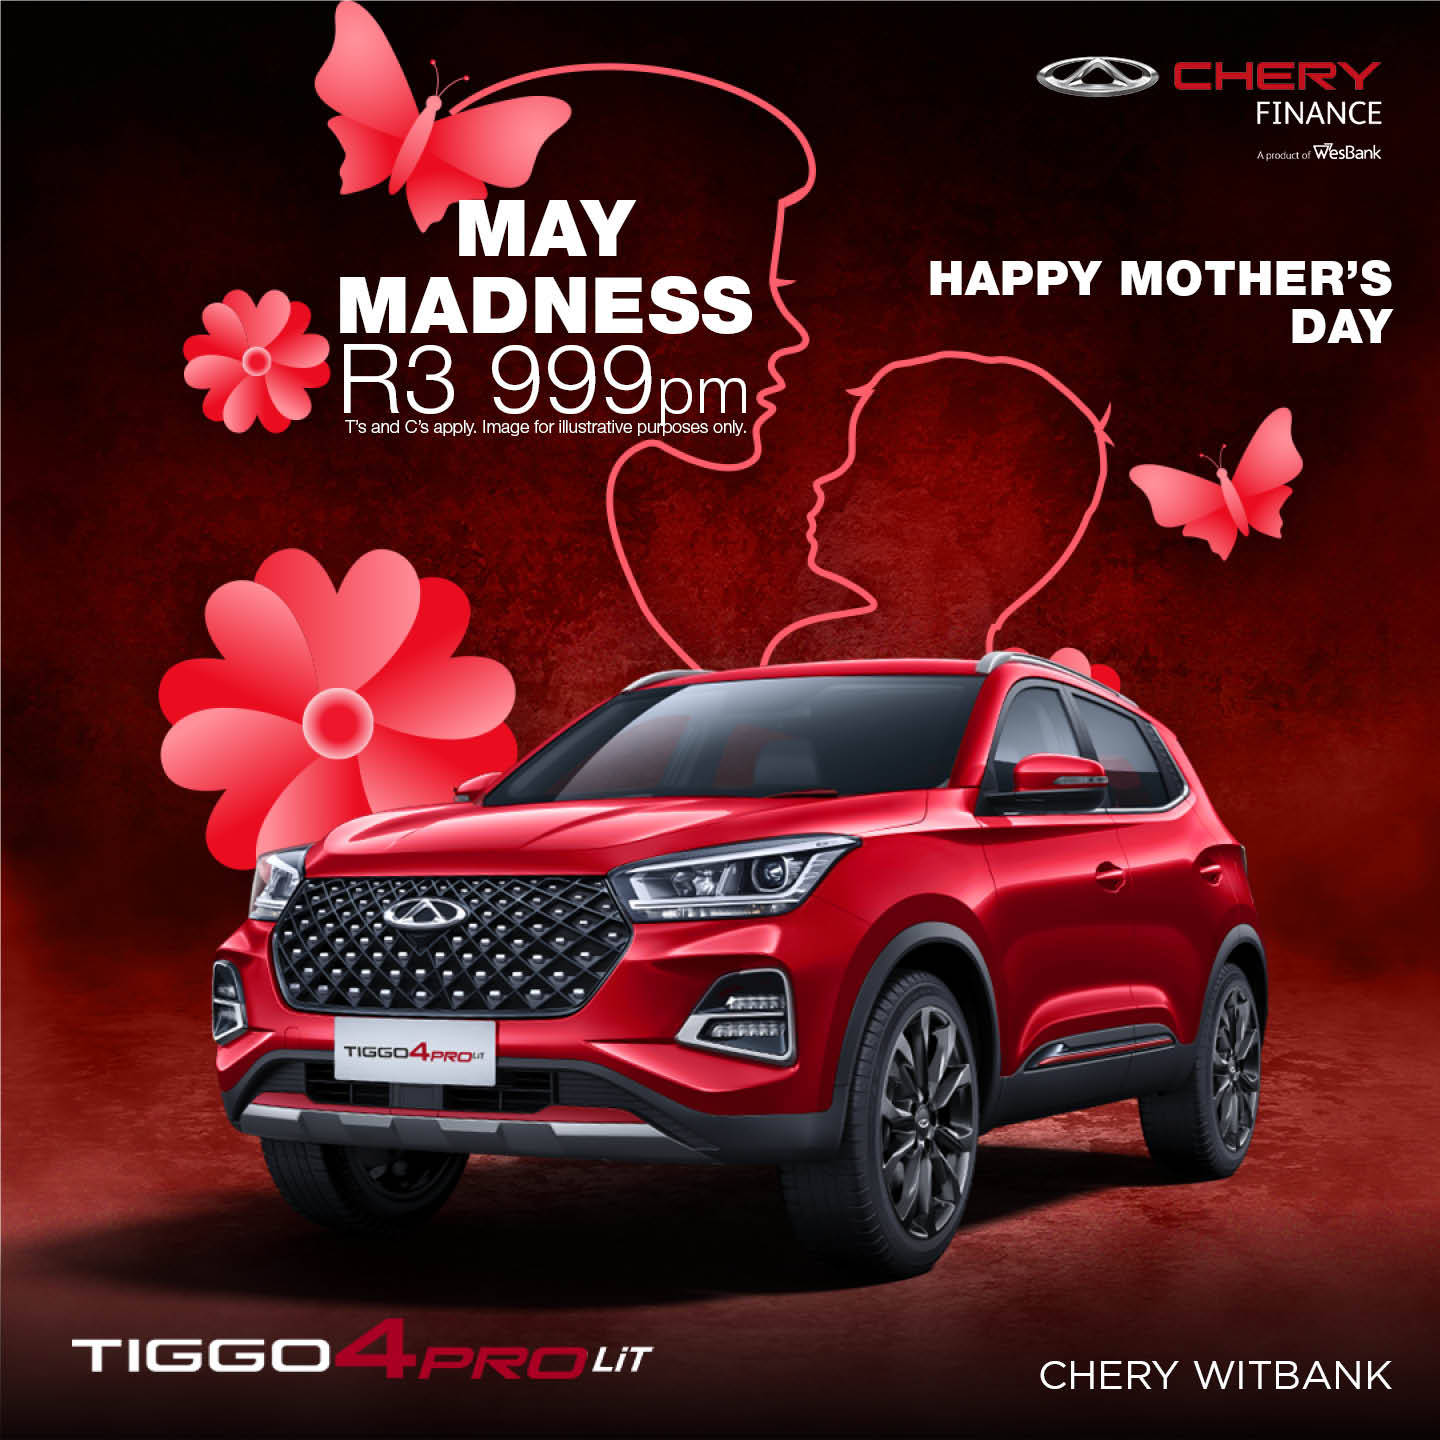 Mother’s Day special with the Tiggo 4 Pro Lit image from 